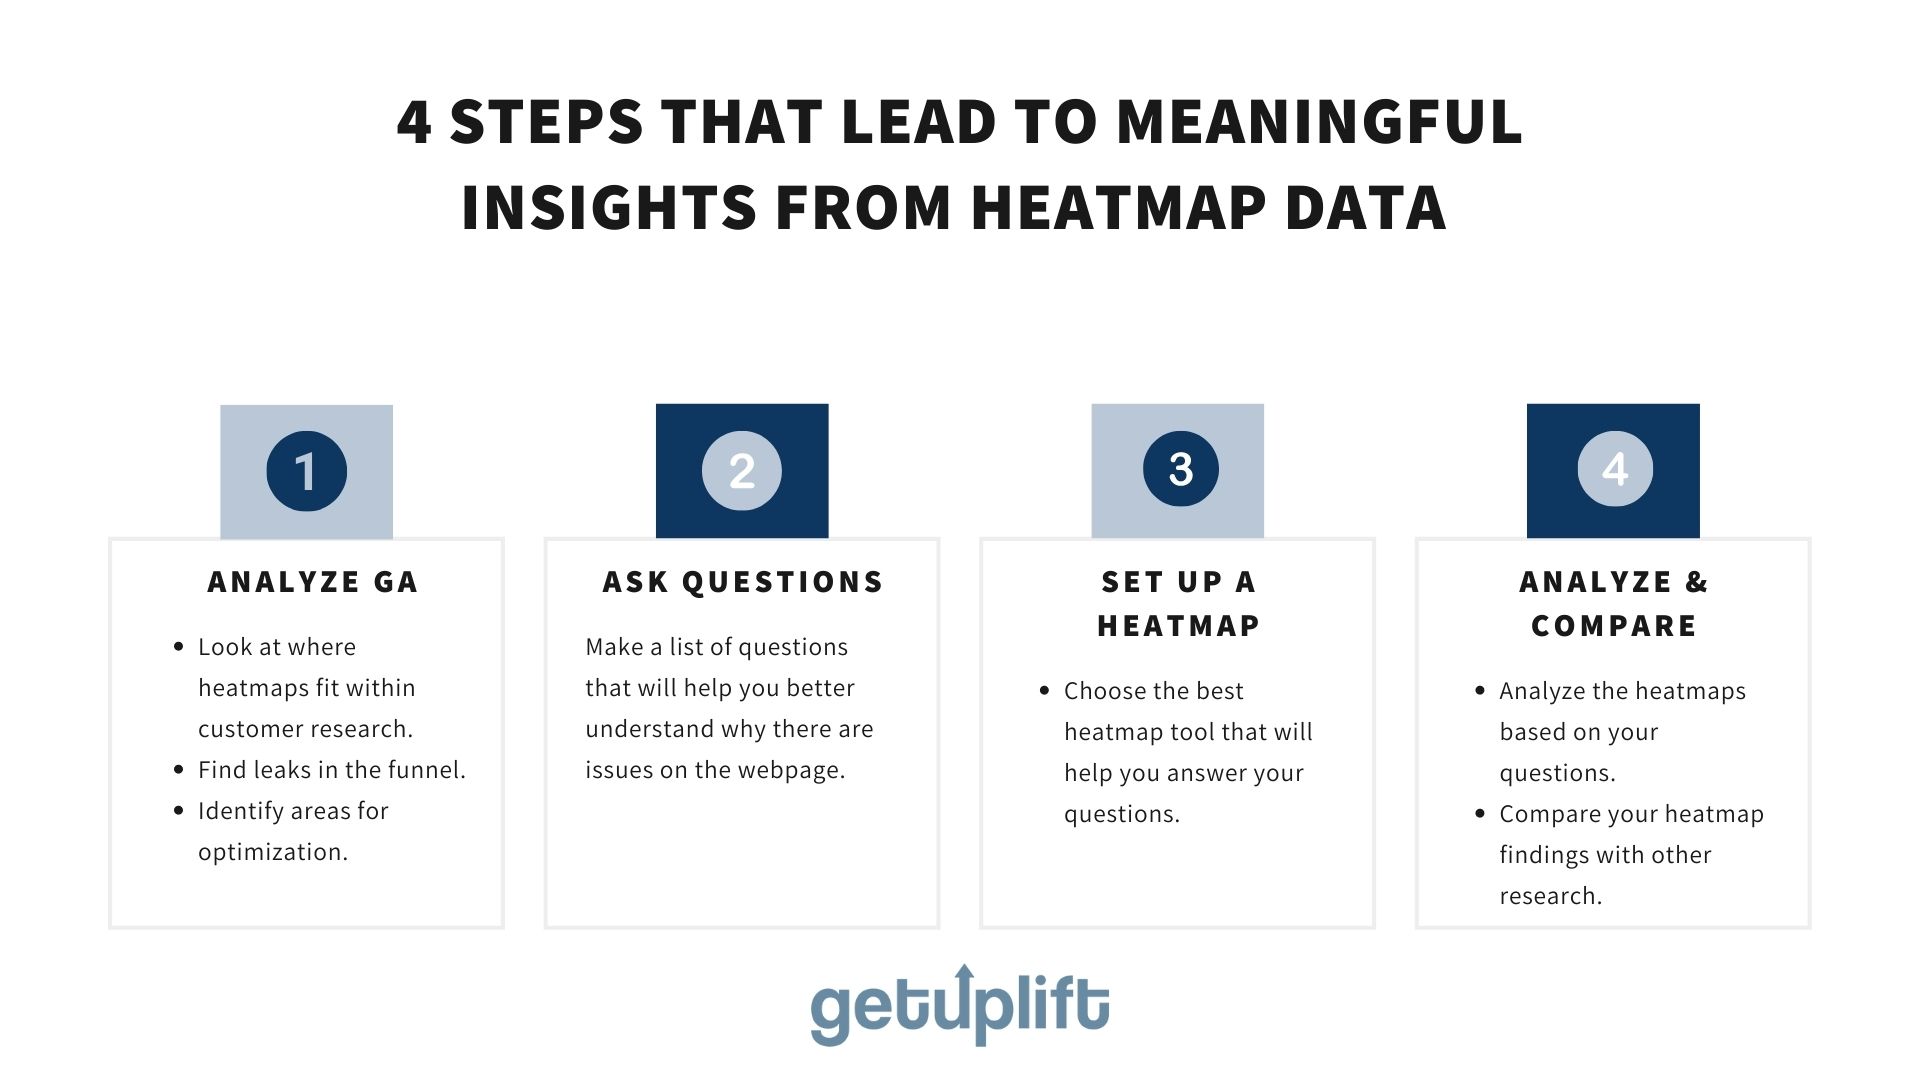 4 steps that lead to meaningful insights from heatmap data